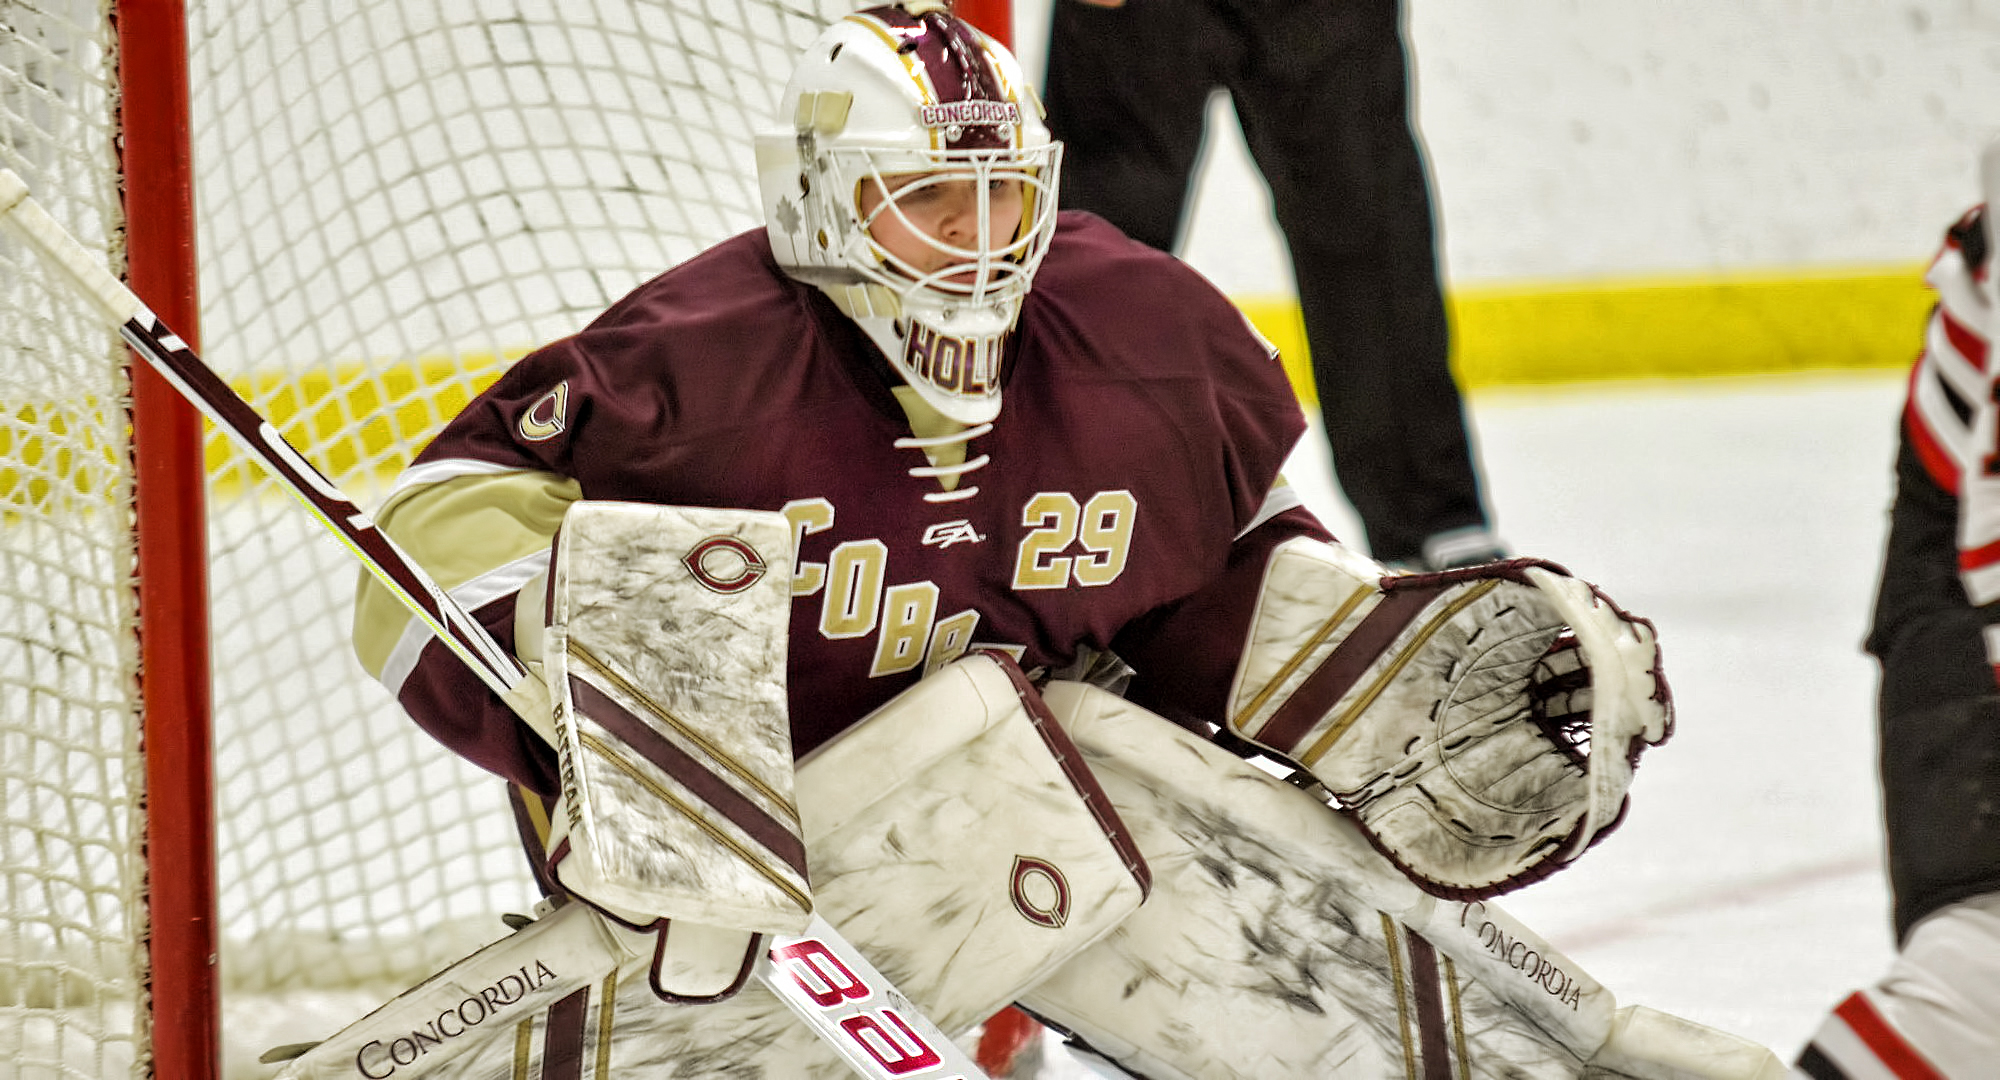 Goalie Gabe Holum gets ready to make a stop during the Cobbers' 3-2 win at Wis.-River Falls. Holum made 19 saves to earn his first college win. (Pic courtesy of BJ Pickard)